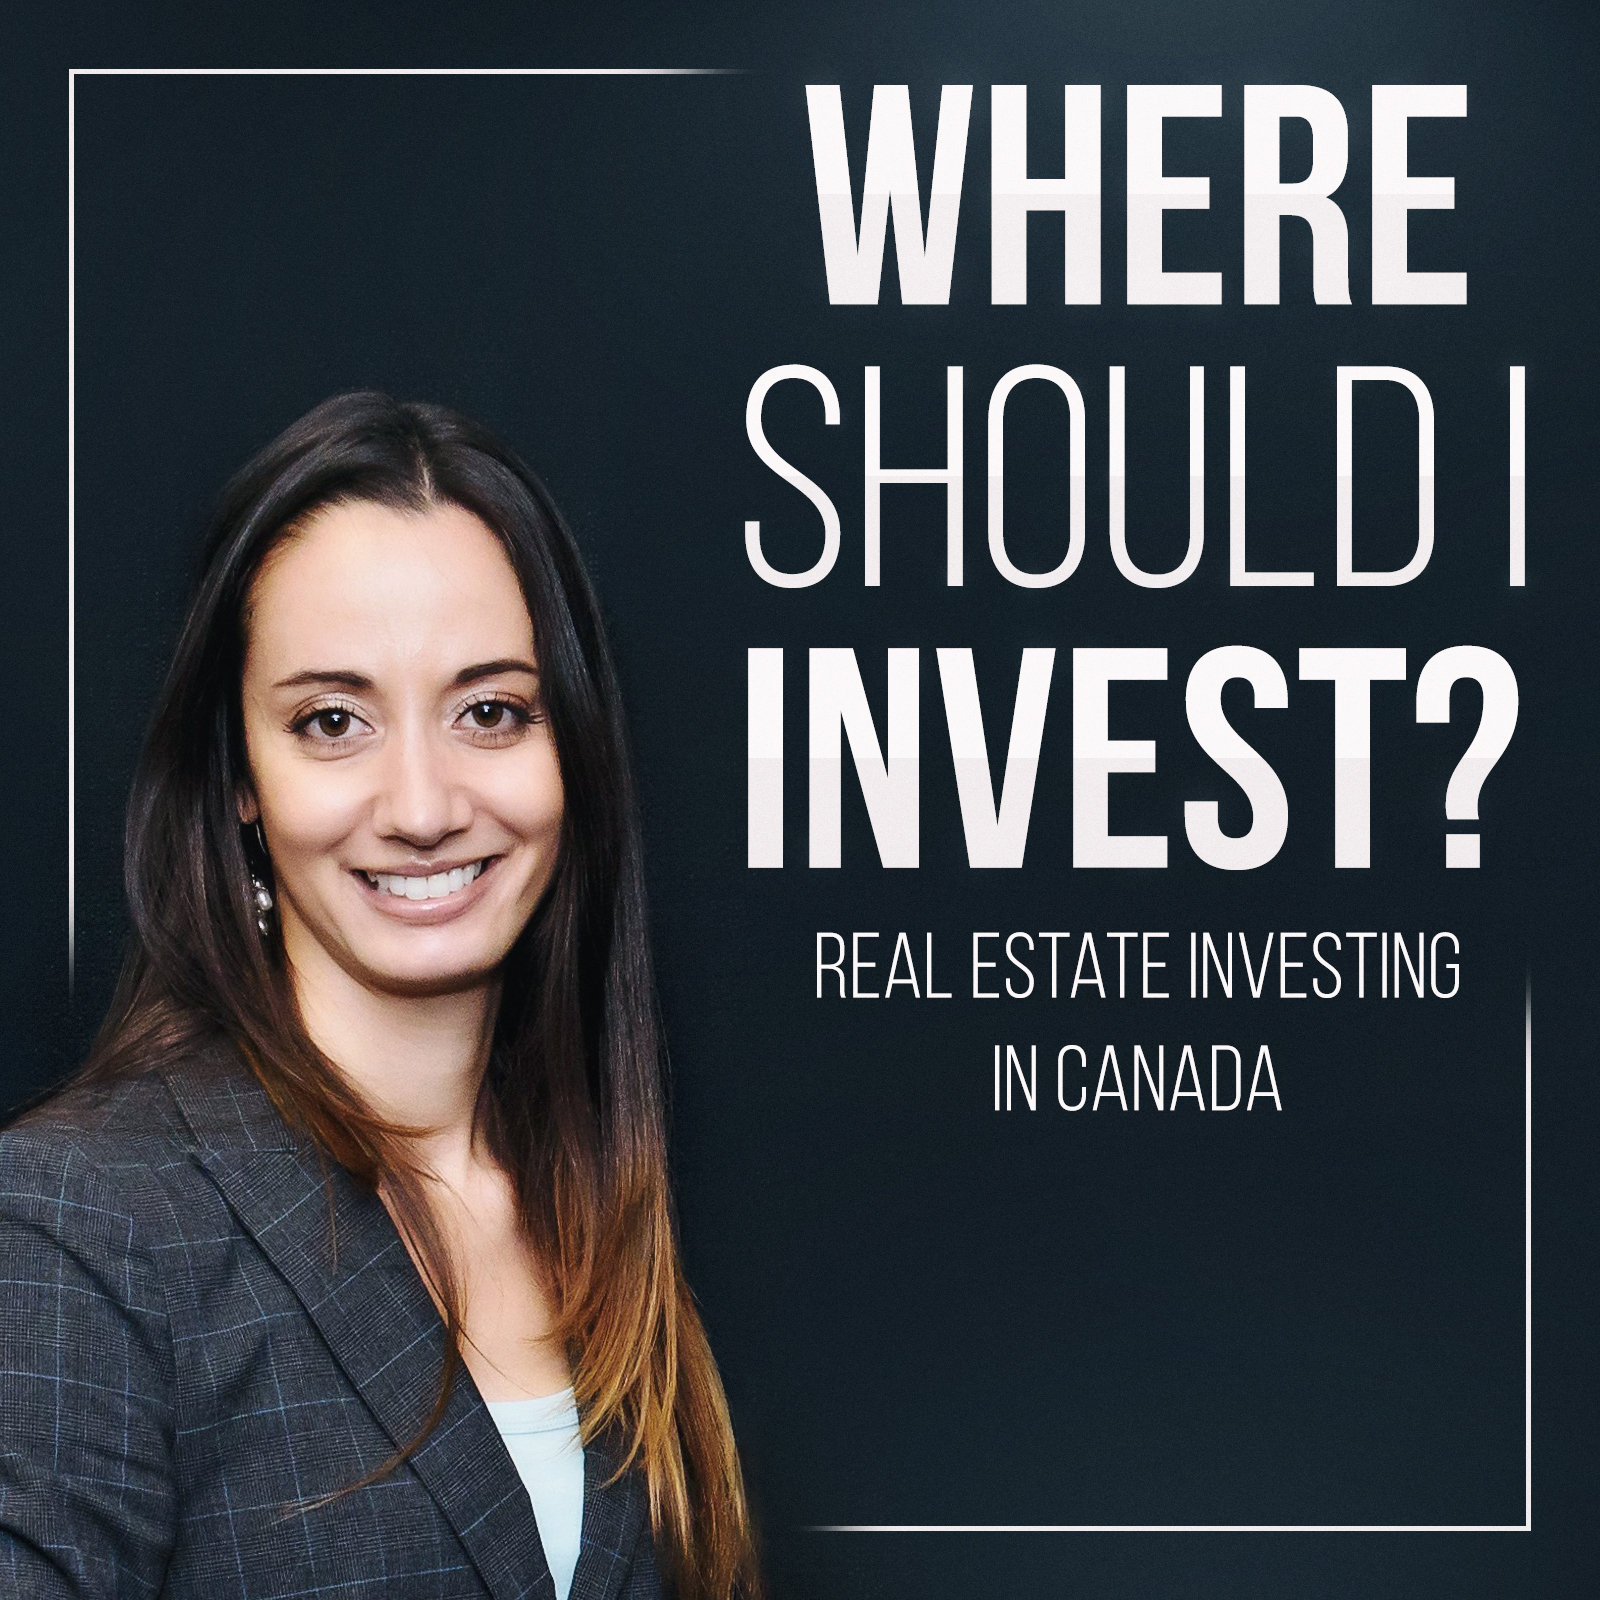 Where Should I Invest? Real Estate Investing